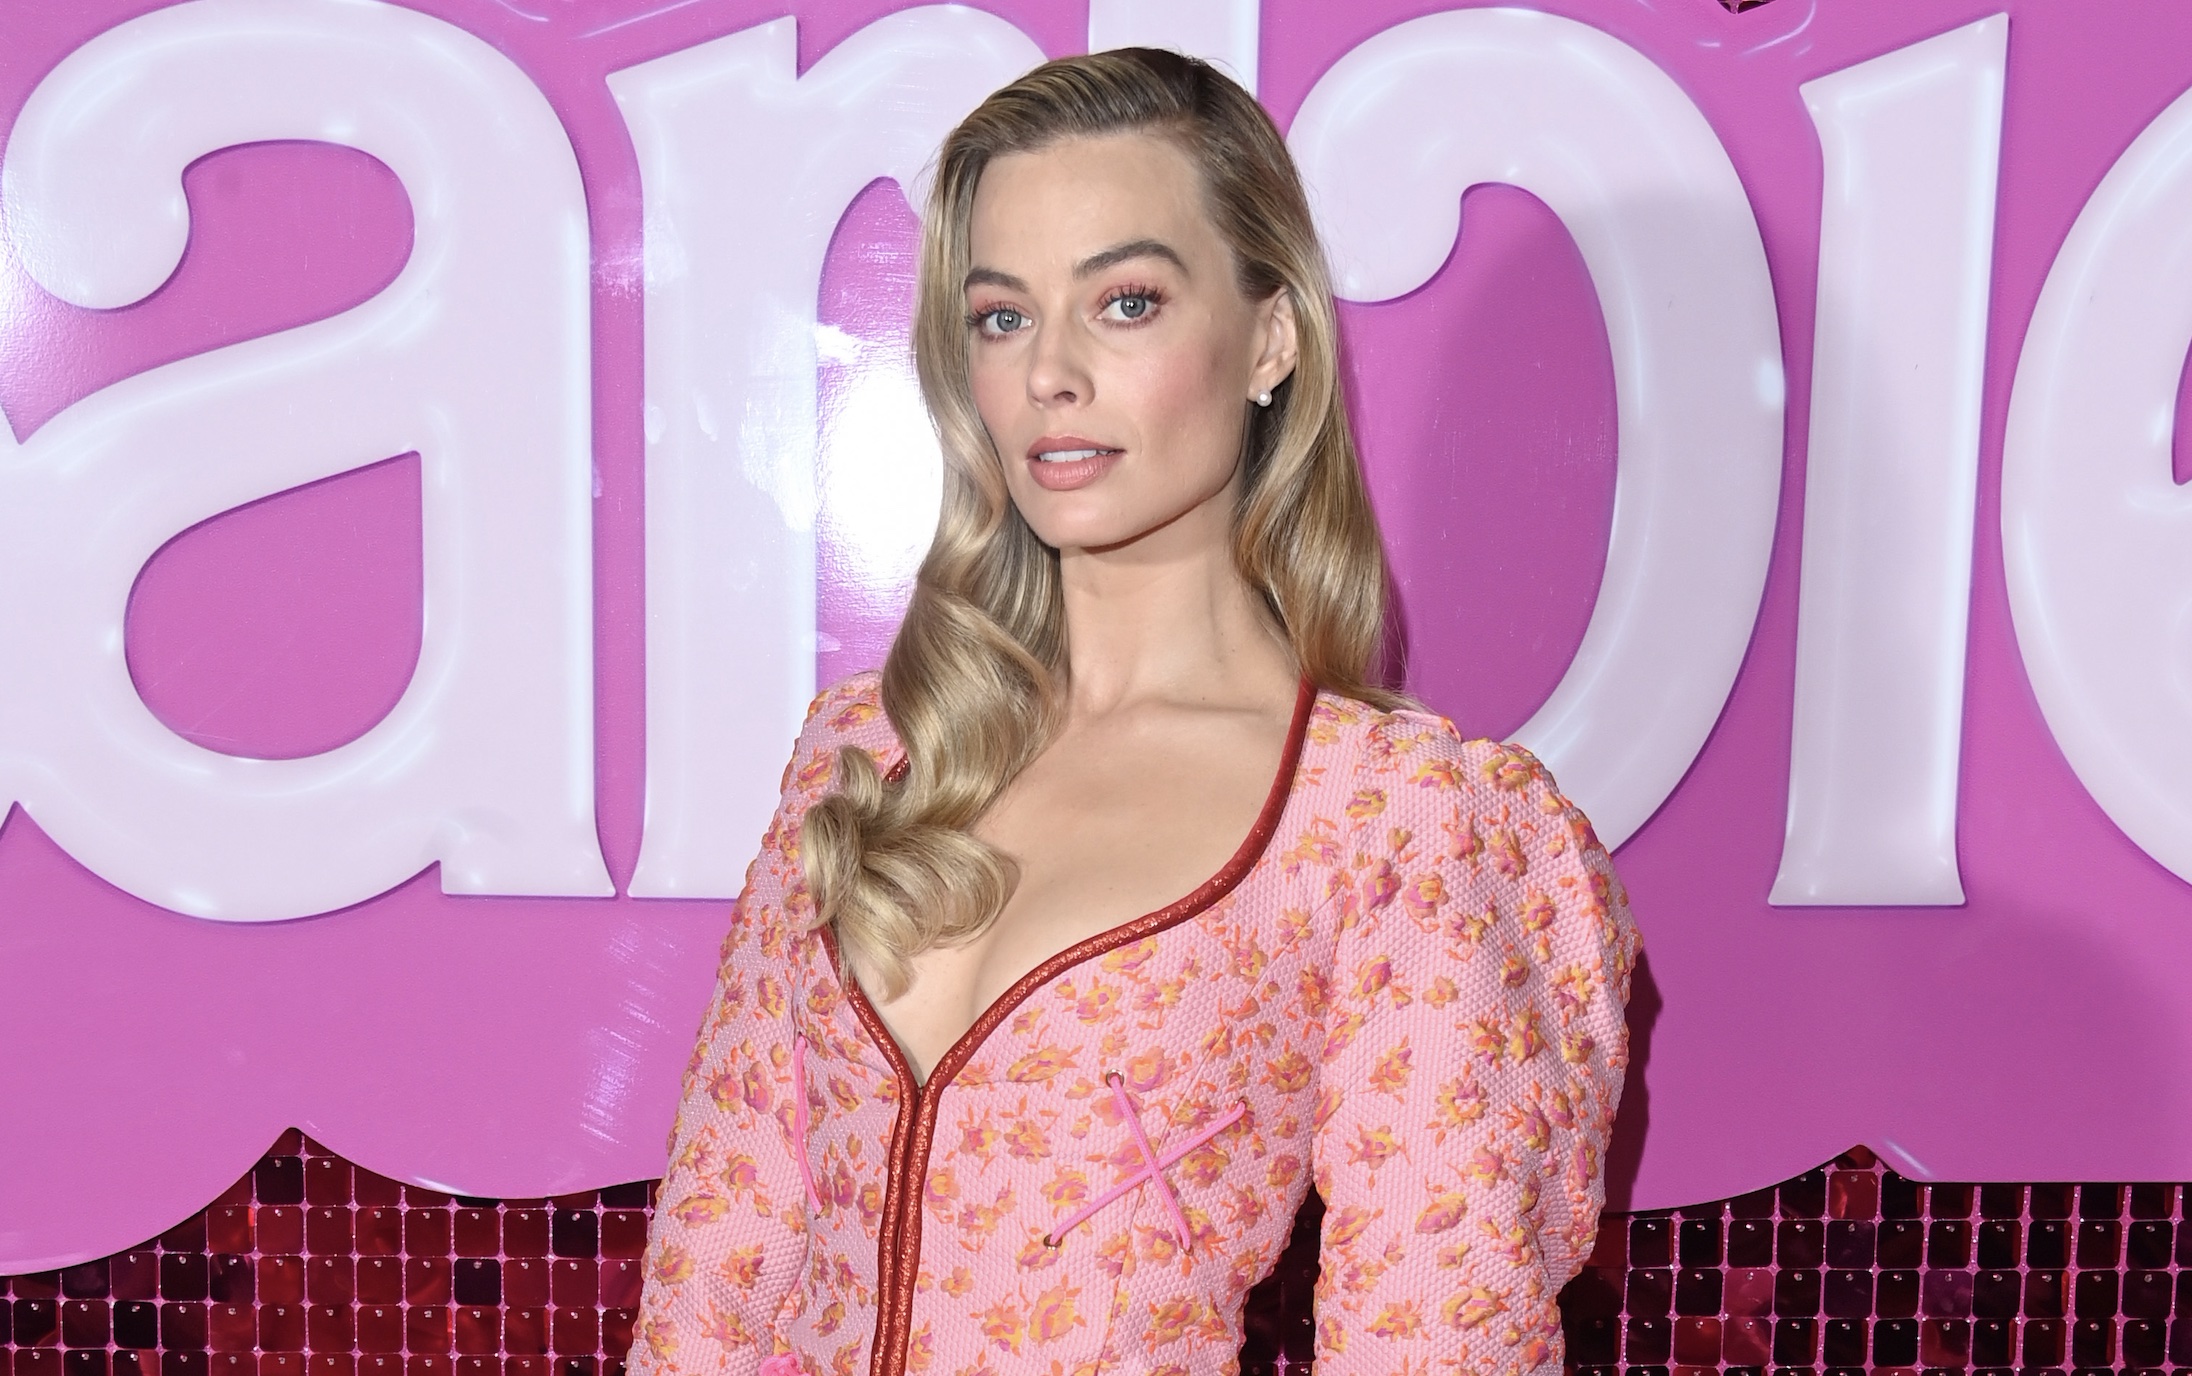 ‘Barbie’: Margot Robbie offered £250,000 to send pictures of her feet